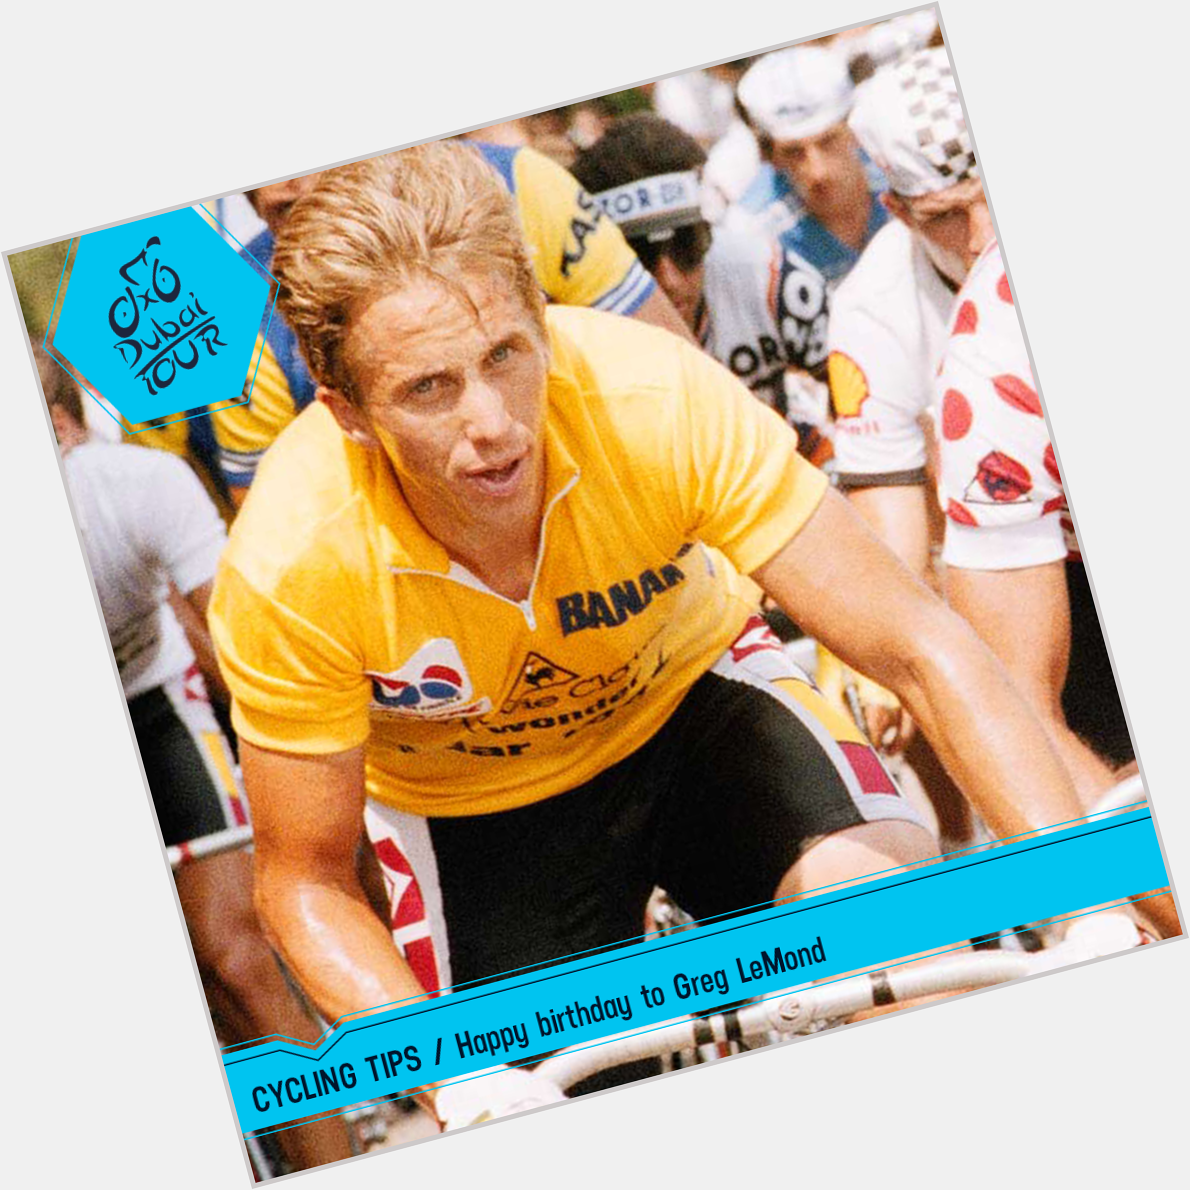 Happy birthday to Greg LeMond! He won the World Championship twice and the Tour de France three times. 